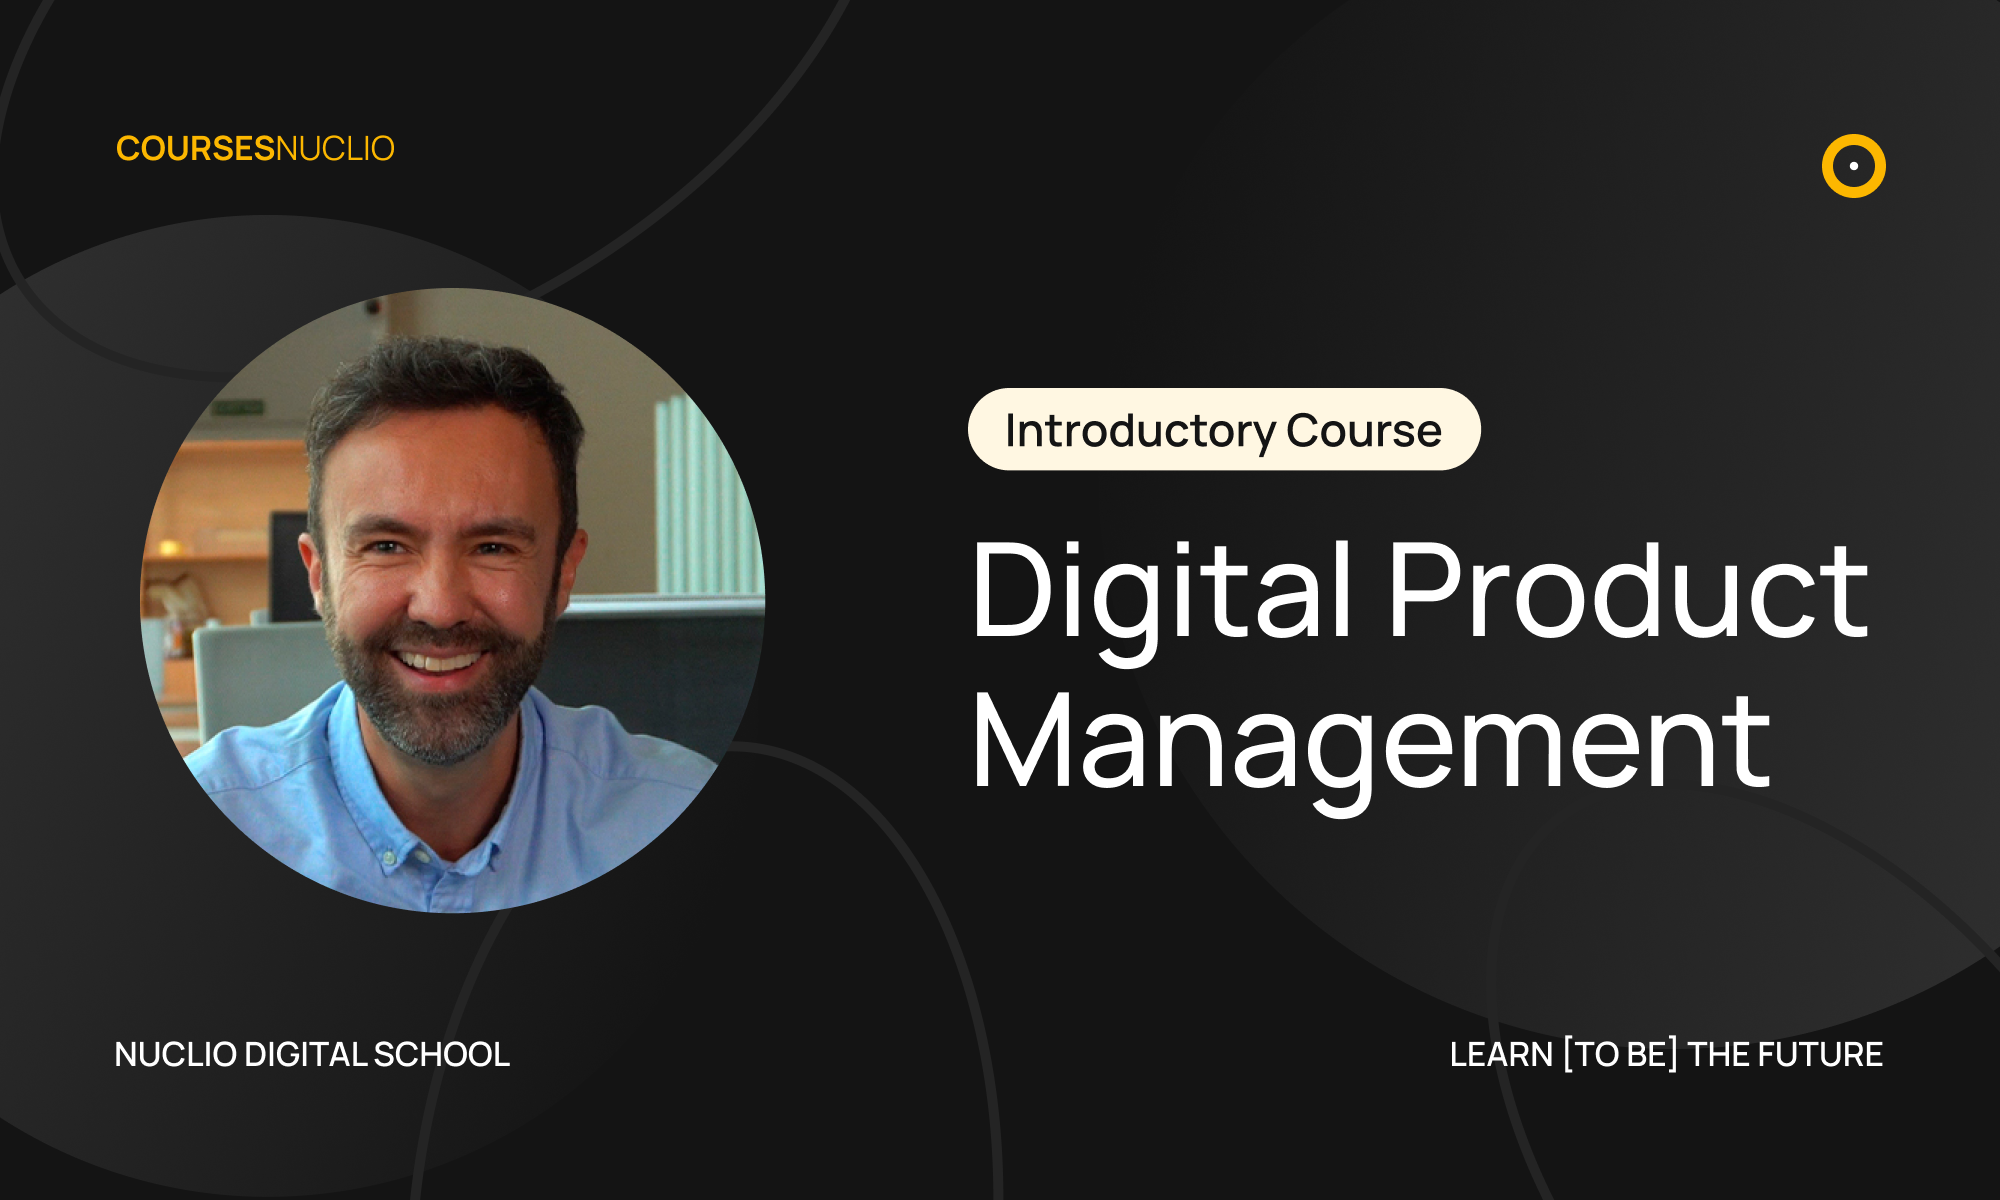 Introductory Course Digital Product Management – Courses Nuclio